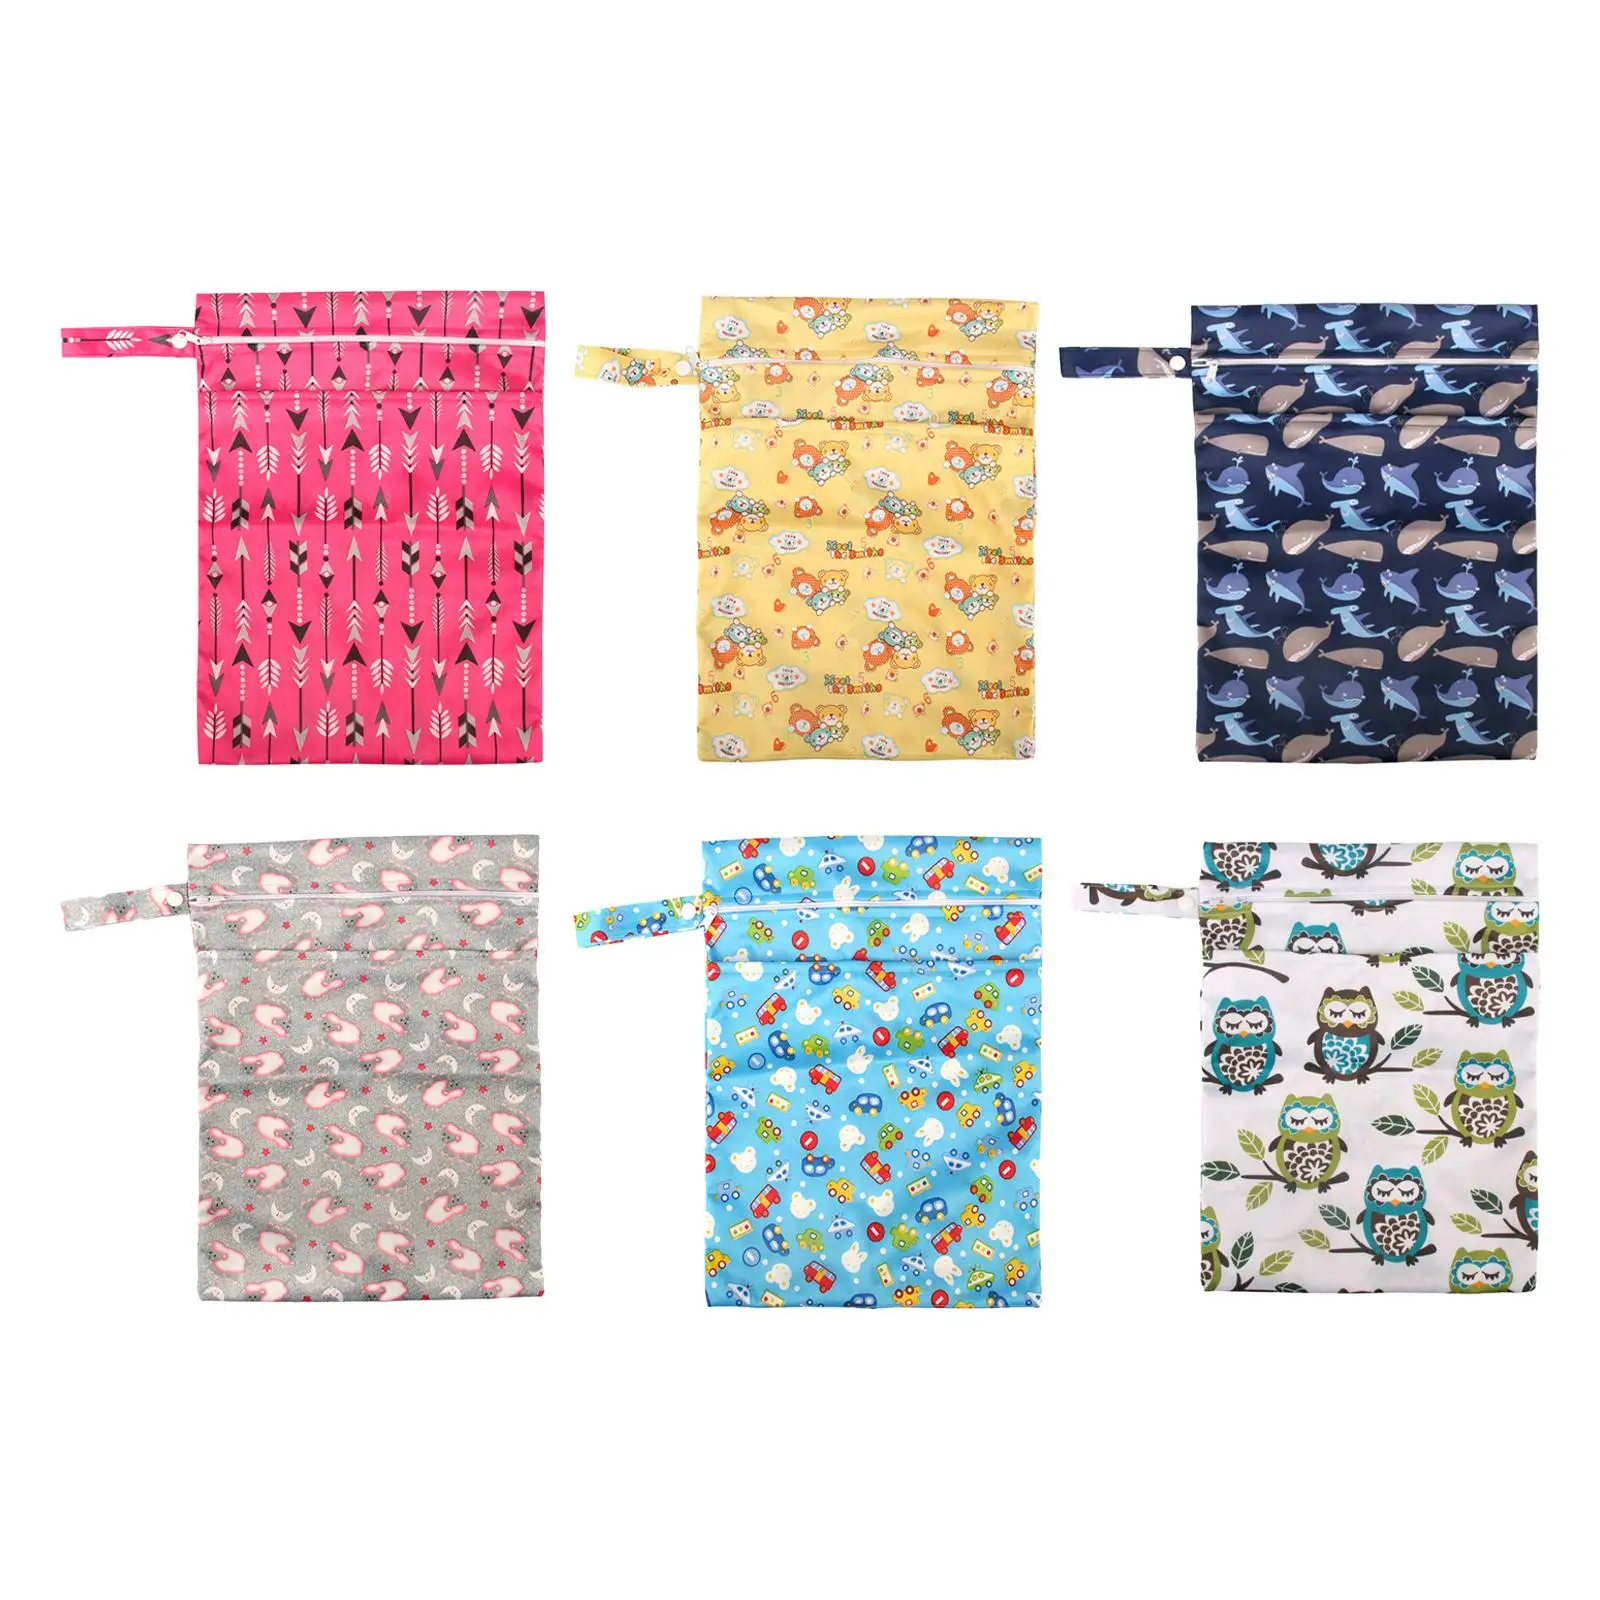 Diaper Pouch Portable Infant Diaper Bag Printed Pocket Waterproof Baby Nappy Bag for Daycare Shopping Beach Travel Outdoor